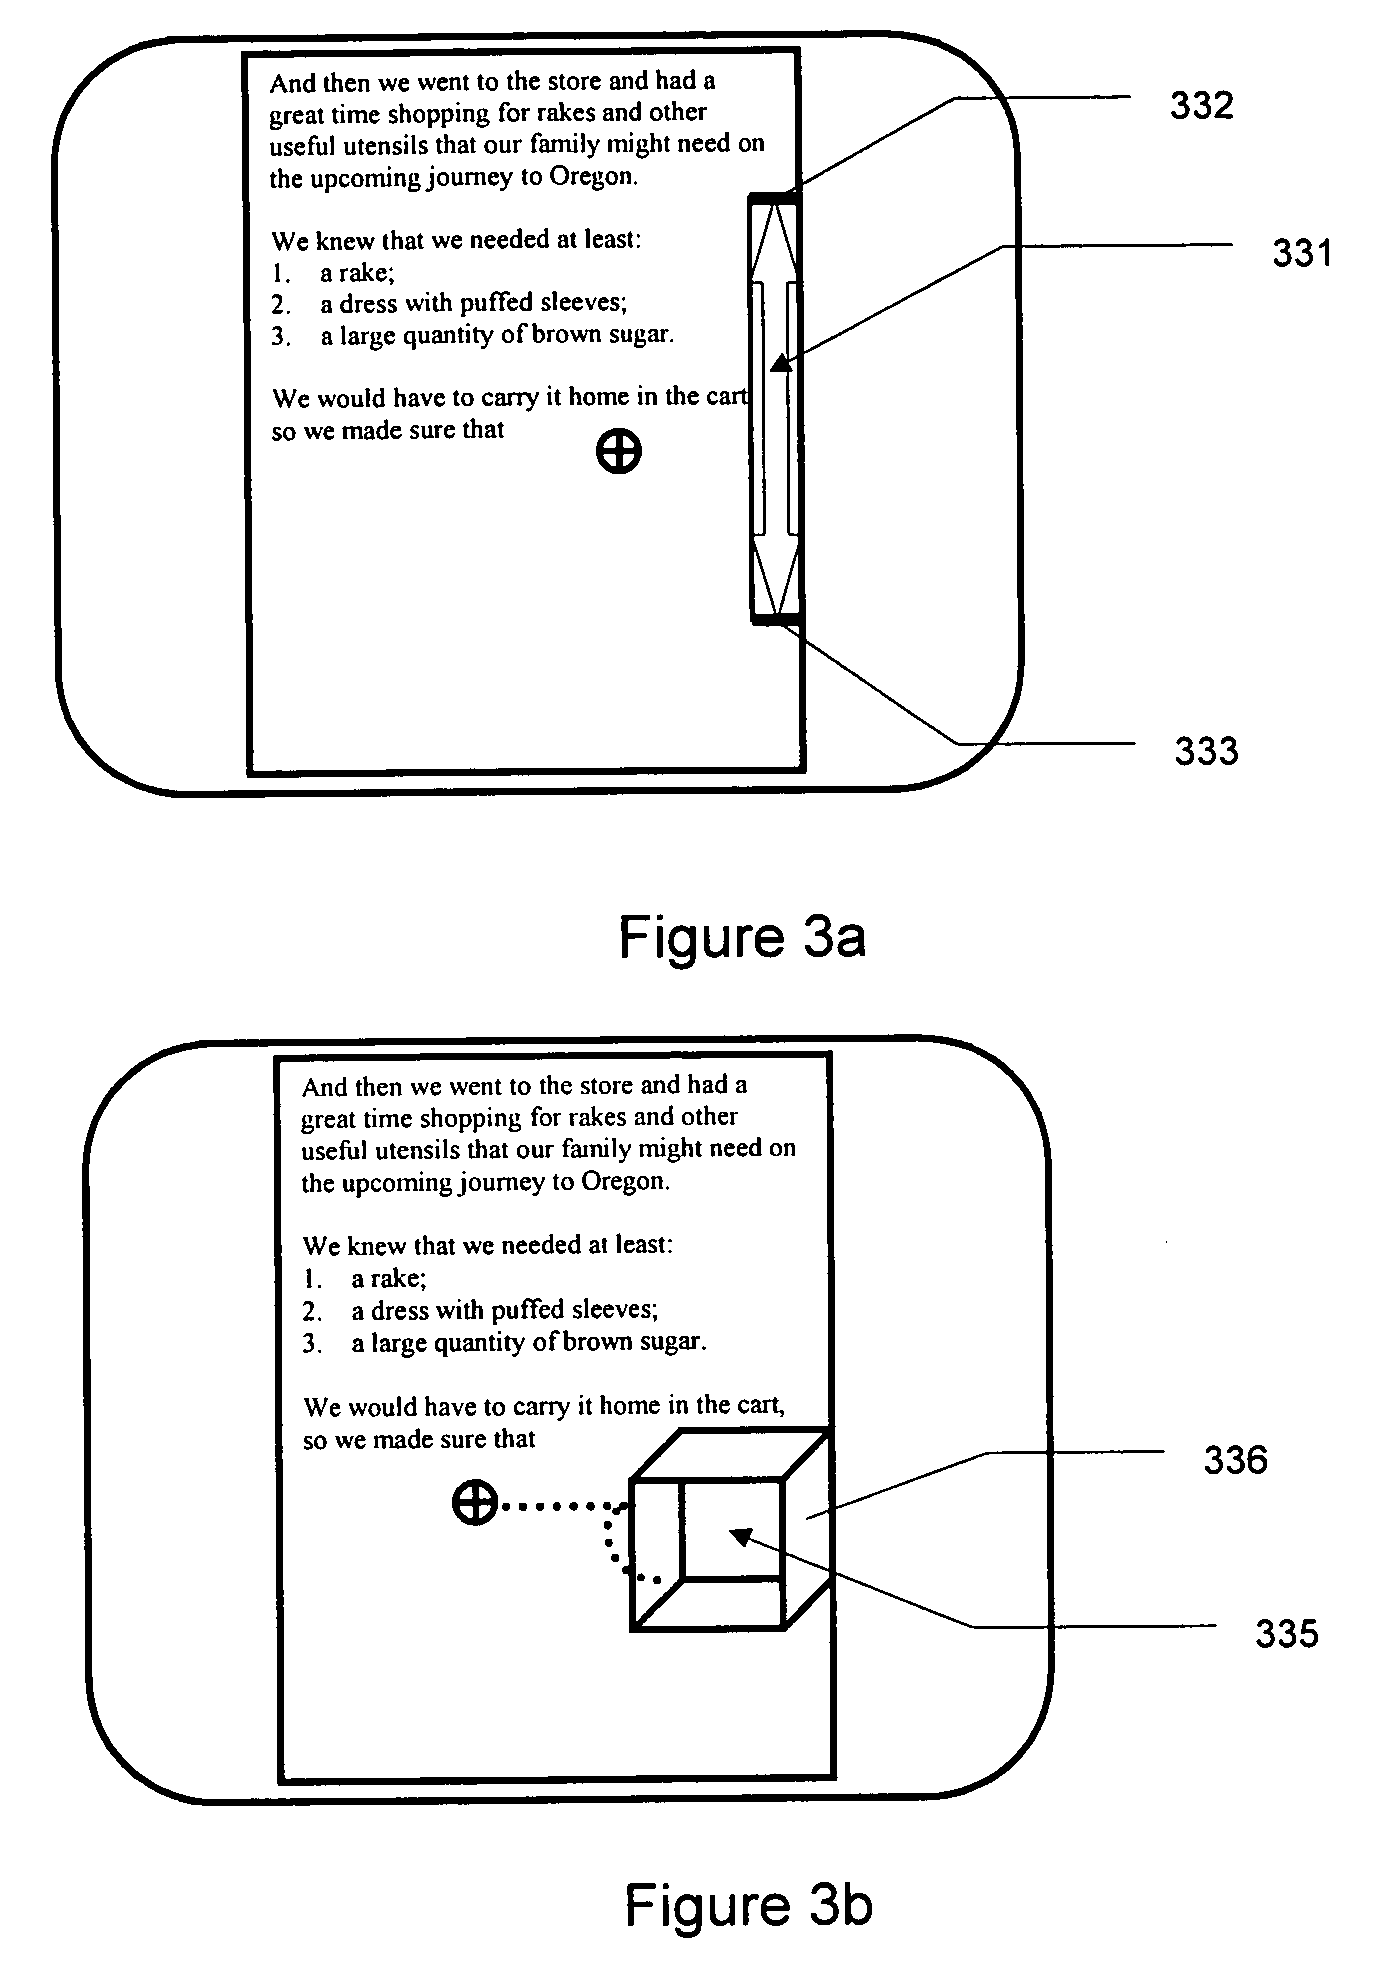 Human-computer interface including haptically controlled interactions